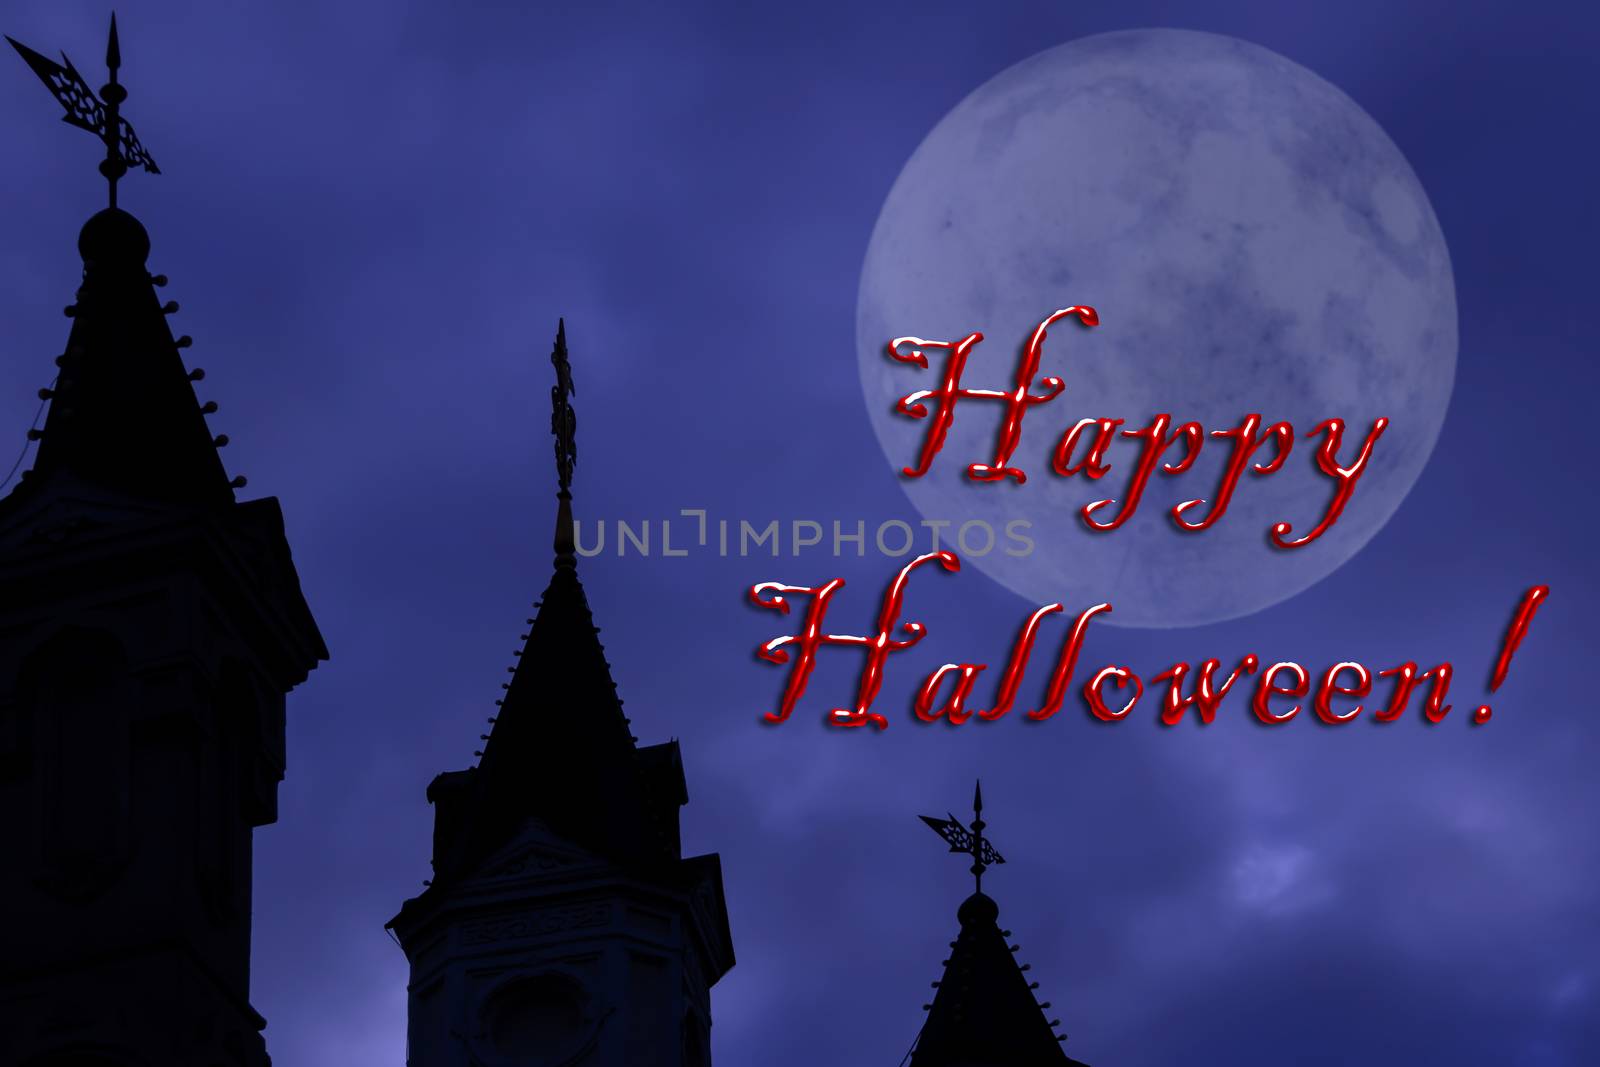 Halloween greeting, text on the background of the silhouette of a Gothic castle tower, cloudy night sky and full moon. by bonilook